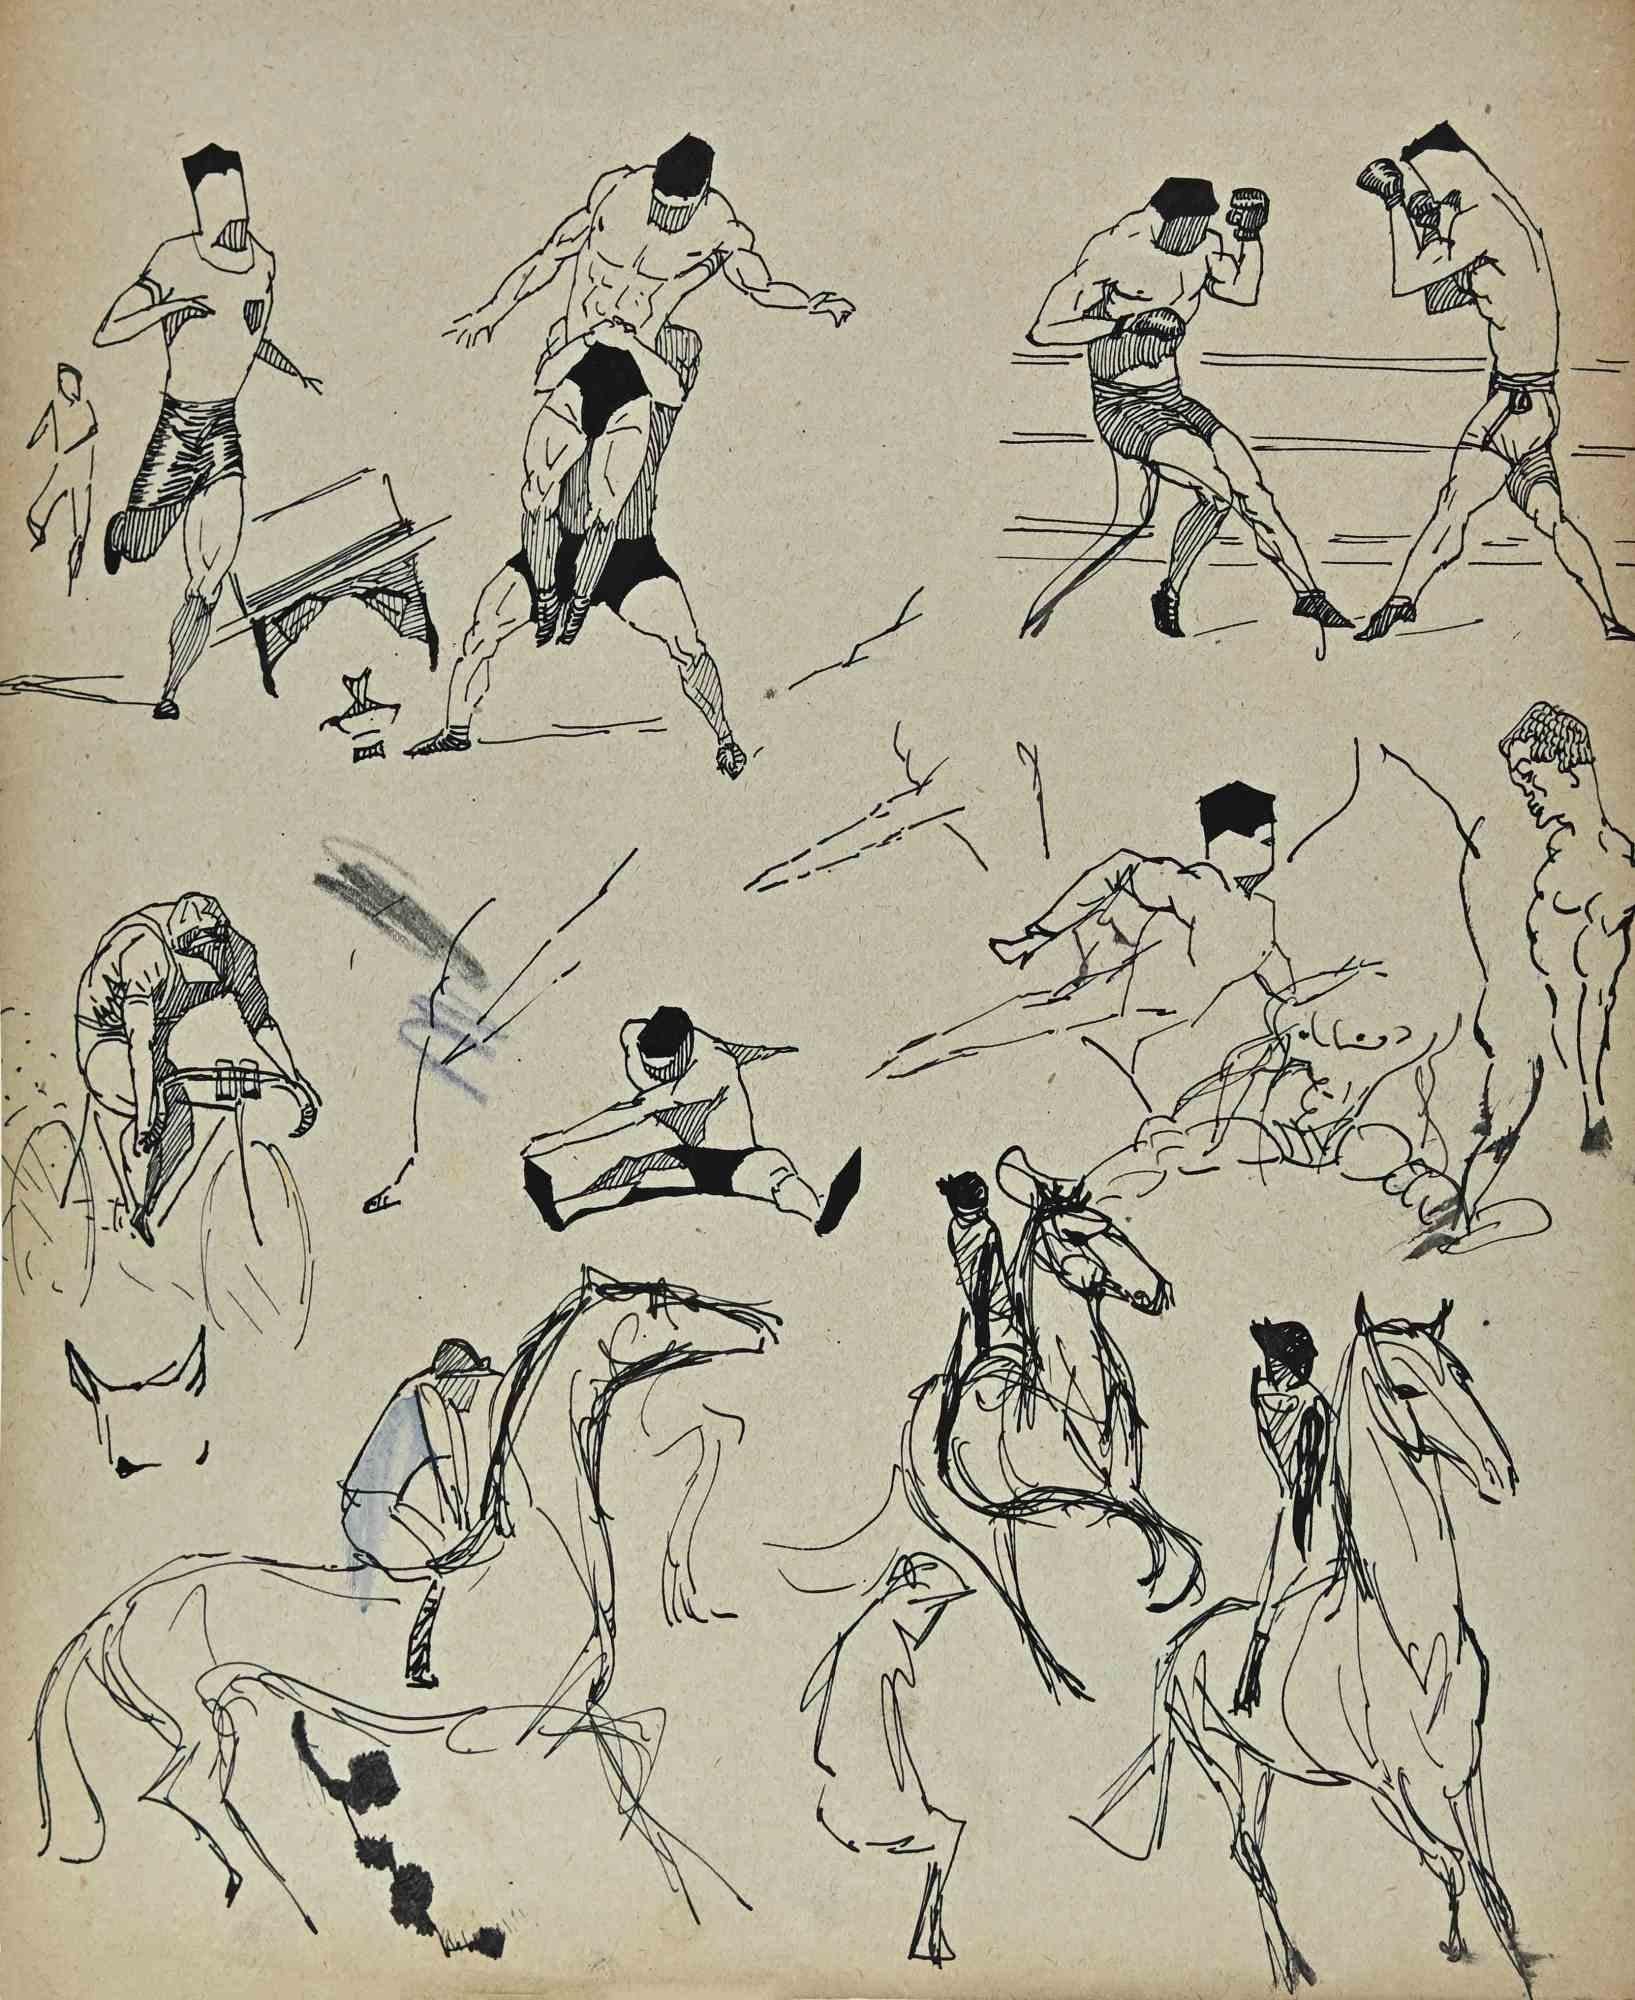 Sportsmen is an original Drawing on paper realized by French painter Norbert Meyre in the mid-20 century.

Drawing in pen.

Good conditions.

The artwork is represented through deft and quick strokes by mastery.

Norbert Meyre is a French